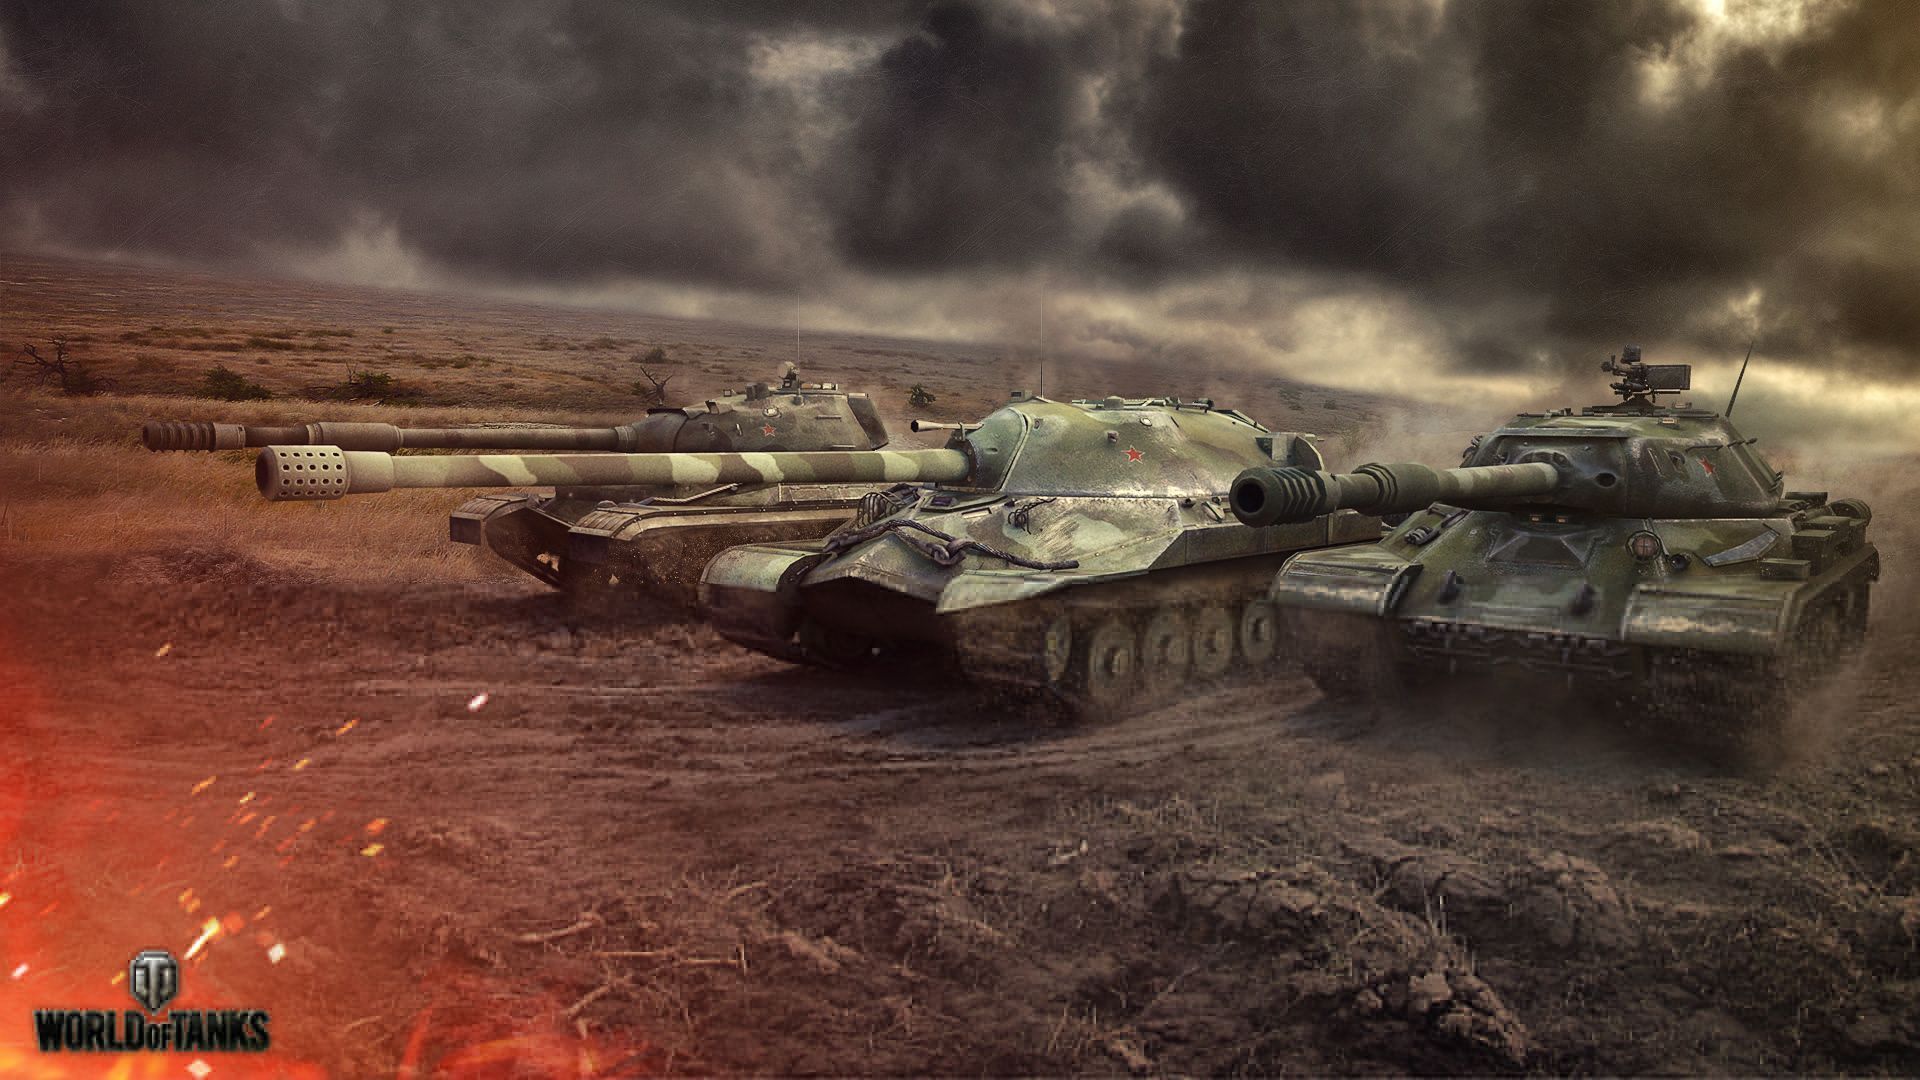 World of Tanks Tanks IS-7 IS-4 IS-8 military wallpaper | 1920x1080 ...